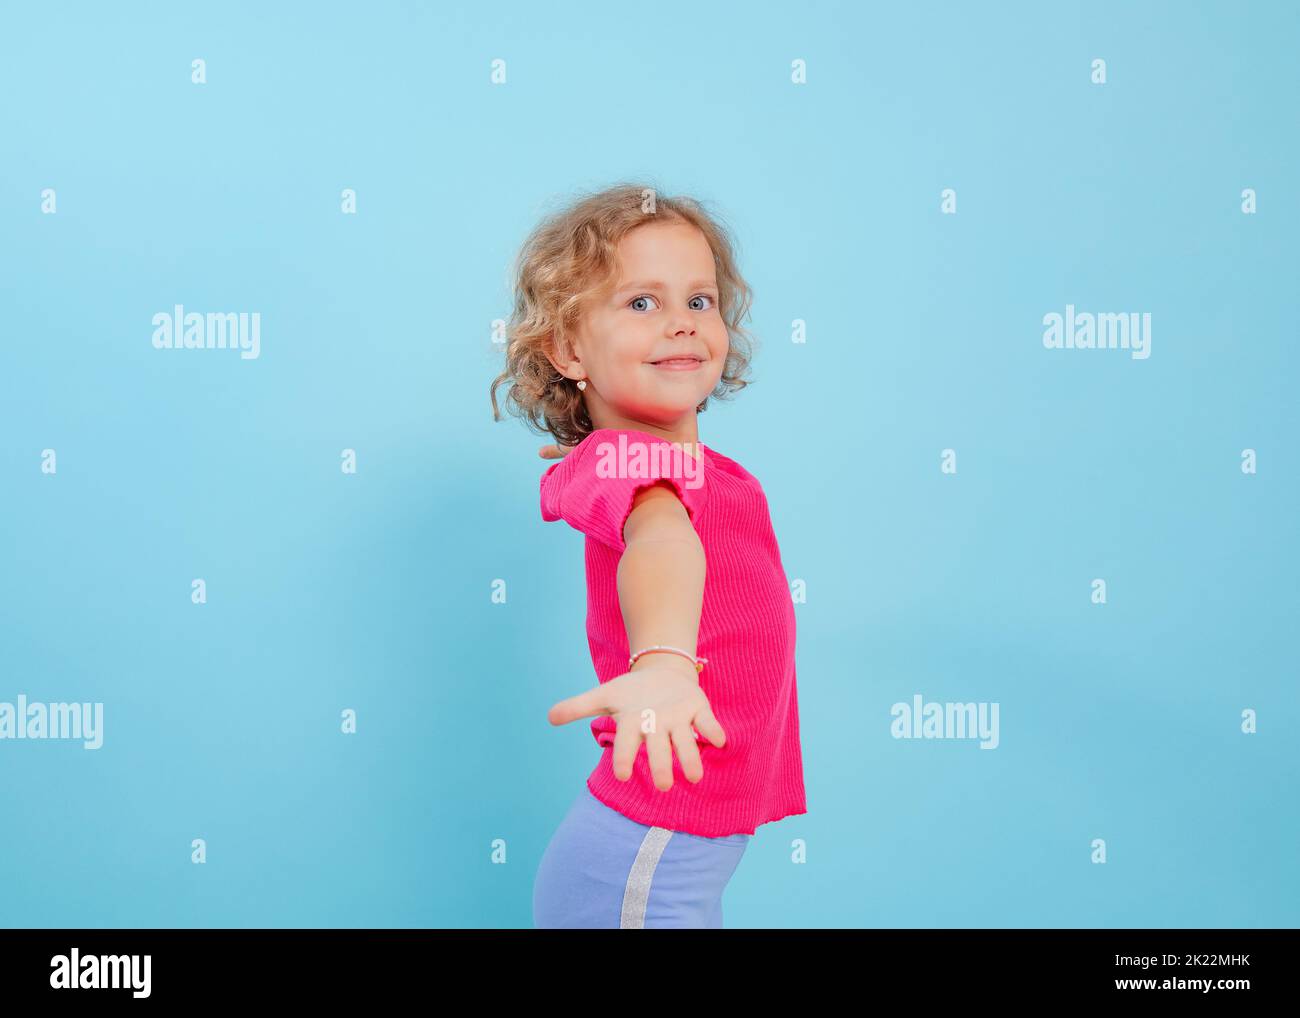 Little smiling, playful, fashionable curly blonde girl in pink shirt and bracelet show hand to camera. Dancing activity Stock Photo